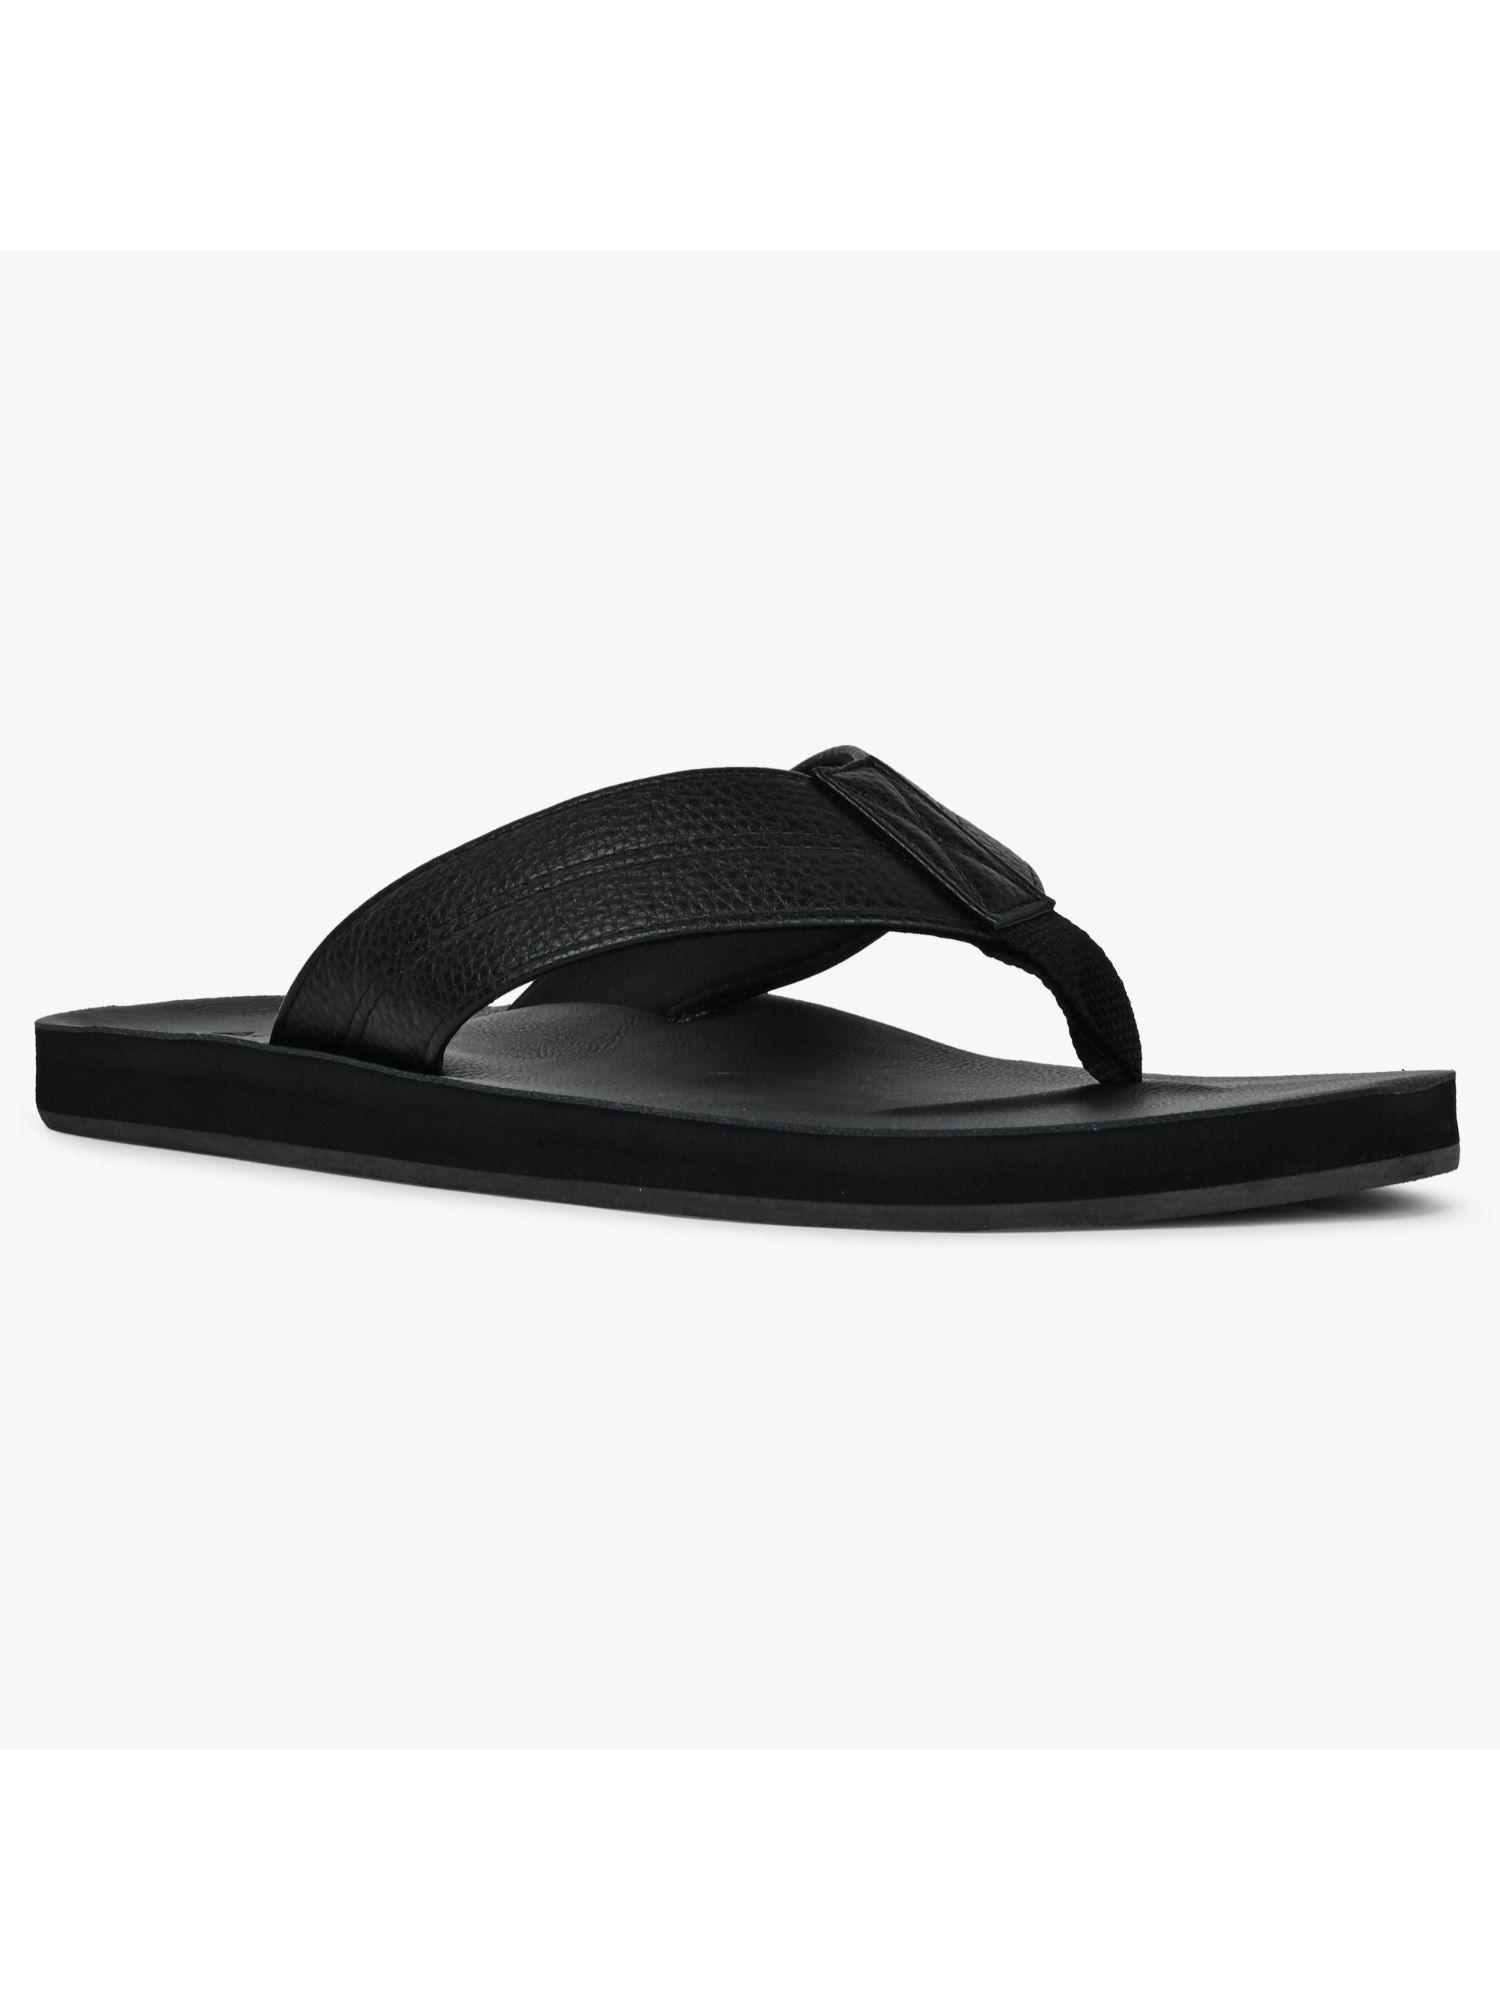 tribord001 black synthetic flipflops